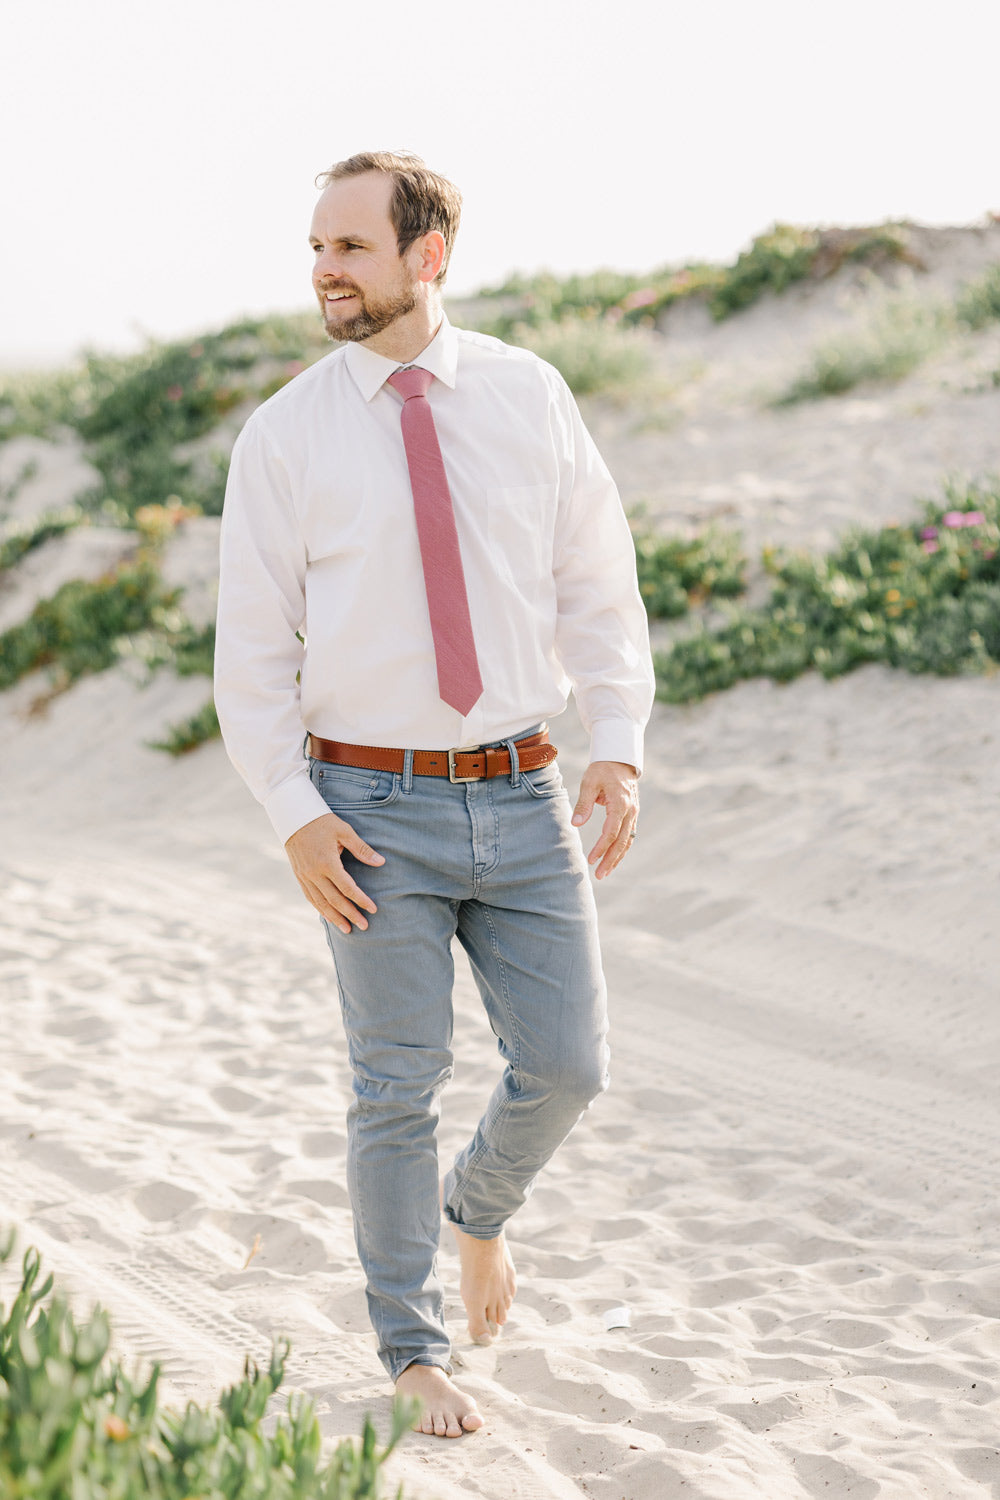 Dusty Rose Tie worn with a white shirt and blue pants.